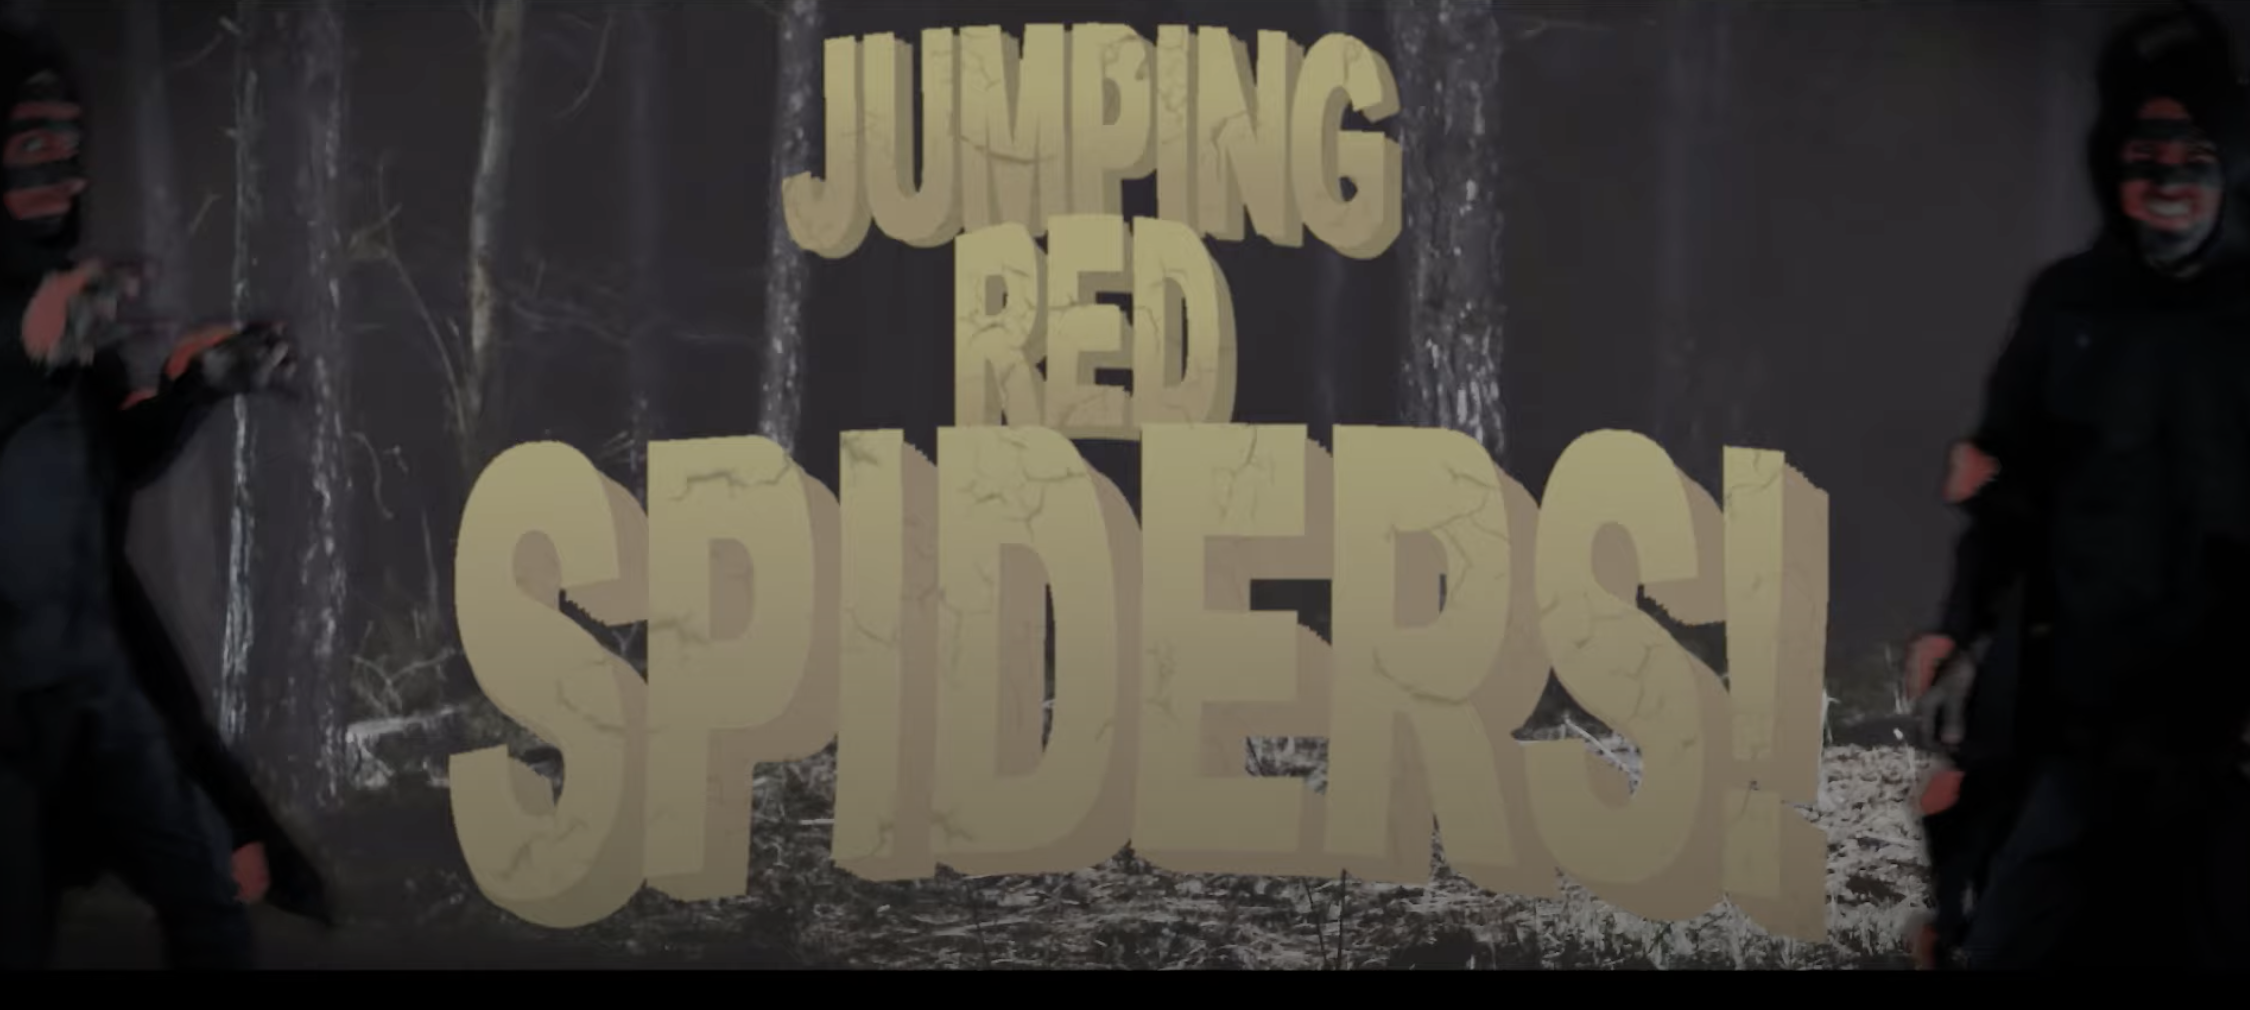 Al the Coordinator – Jumping Red Spiders